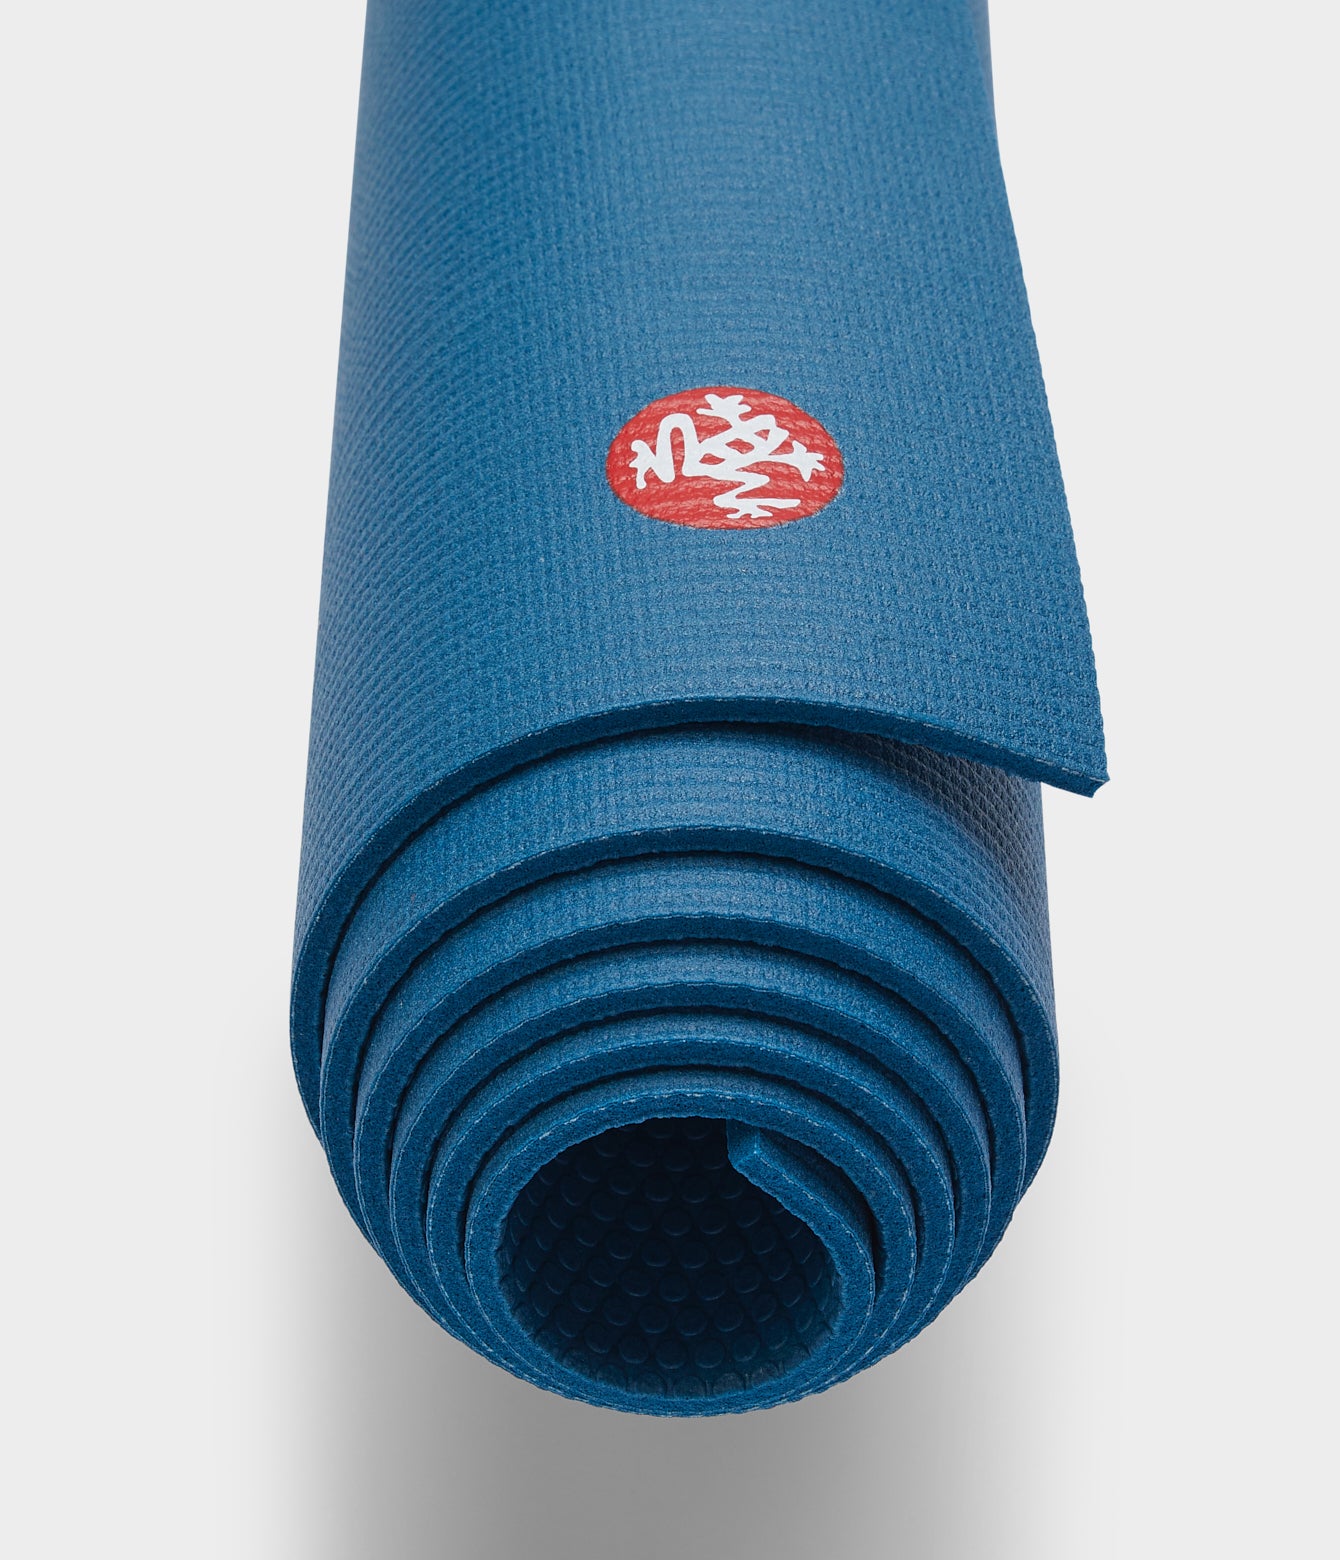 Discount YOGA products in one place ✓ JogaLine store - Manduka